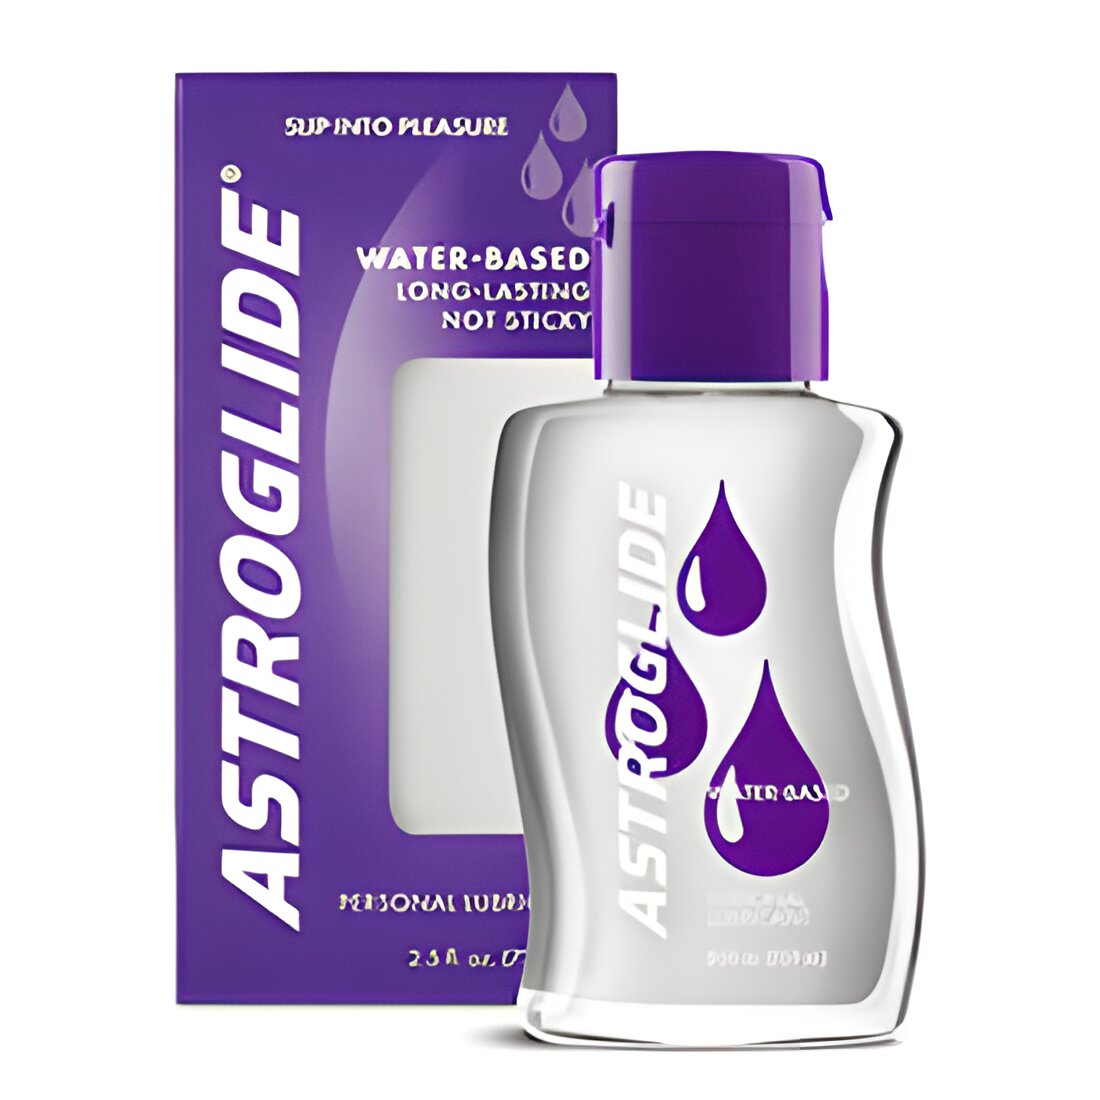 Free Lube Sample From Astroglide